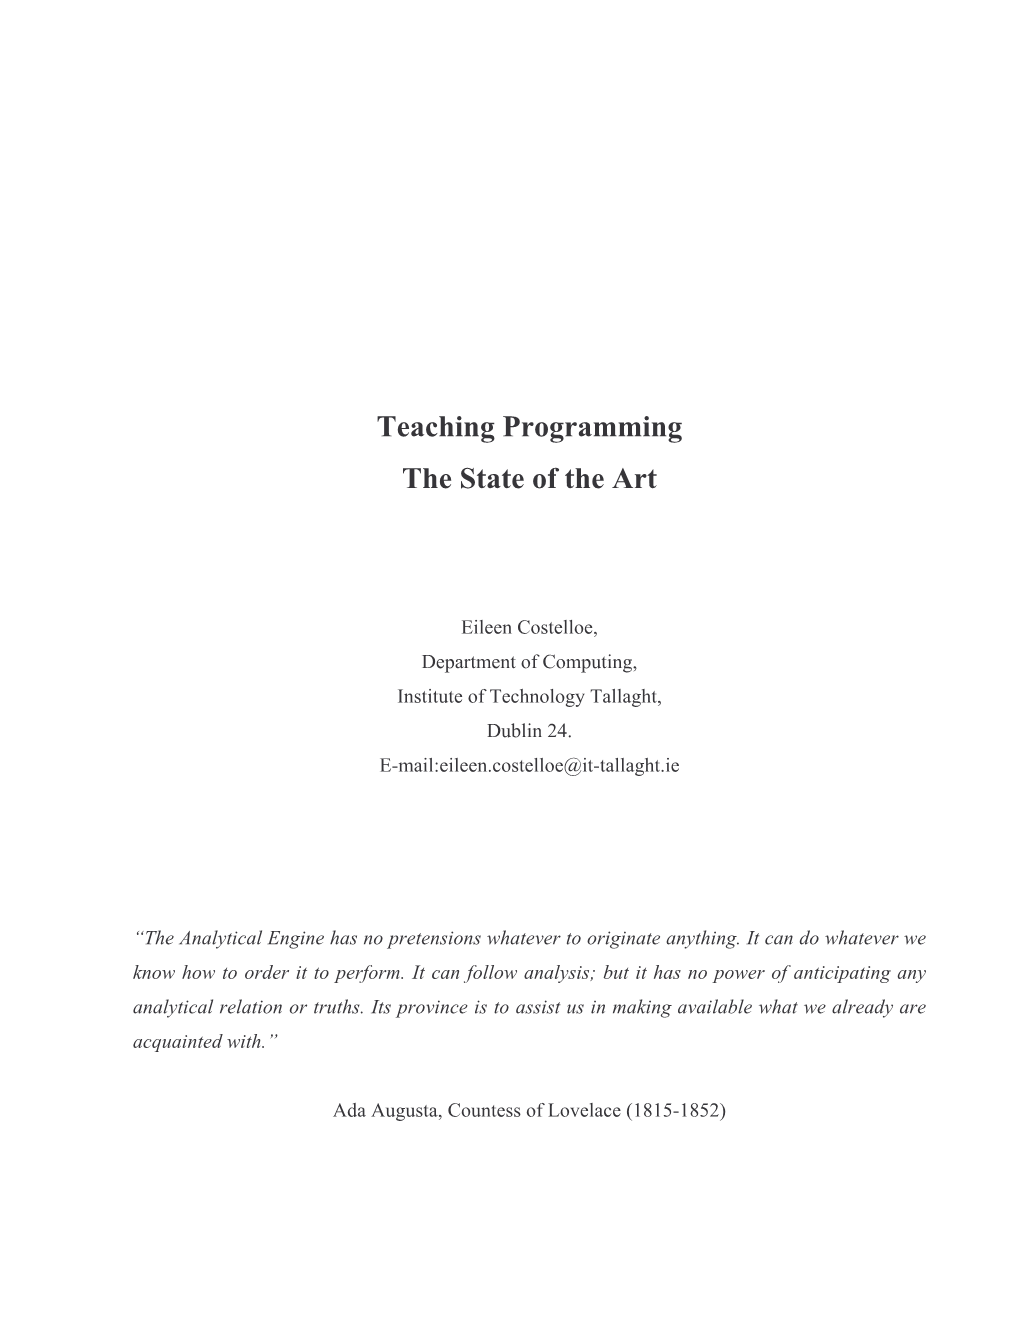 Teaching Programming the State of the Art